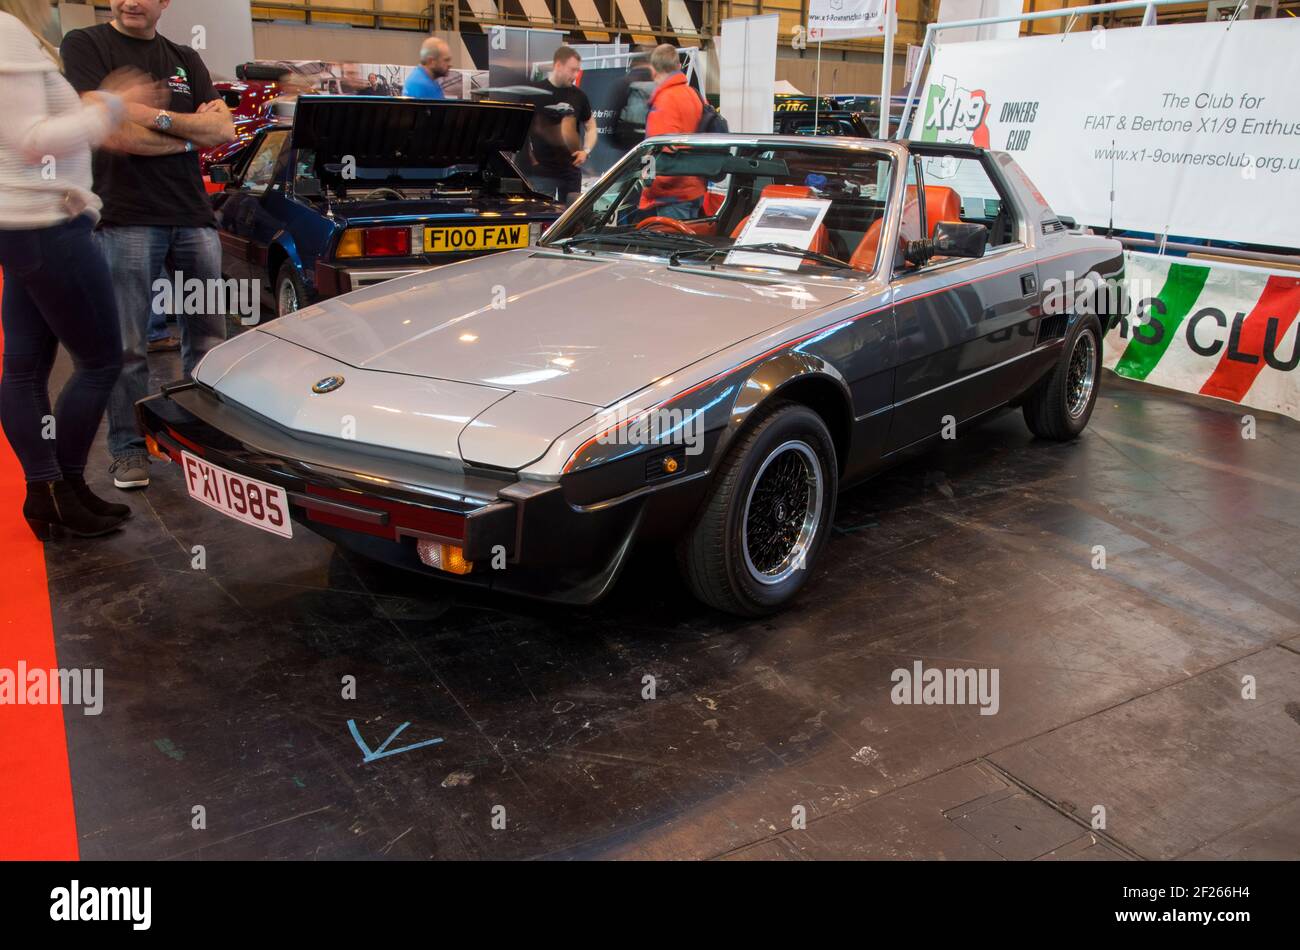 Fiat X19 Cars on show at the NEC Classic Car Show, UK Stock Photo